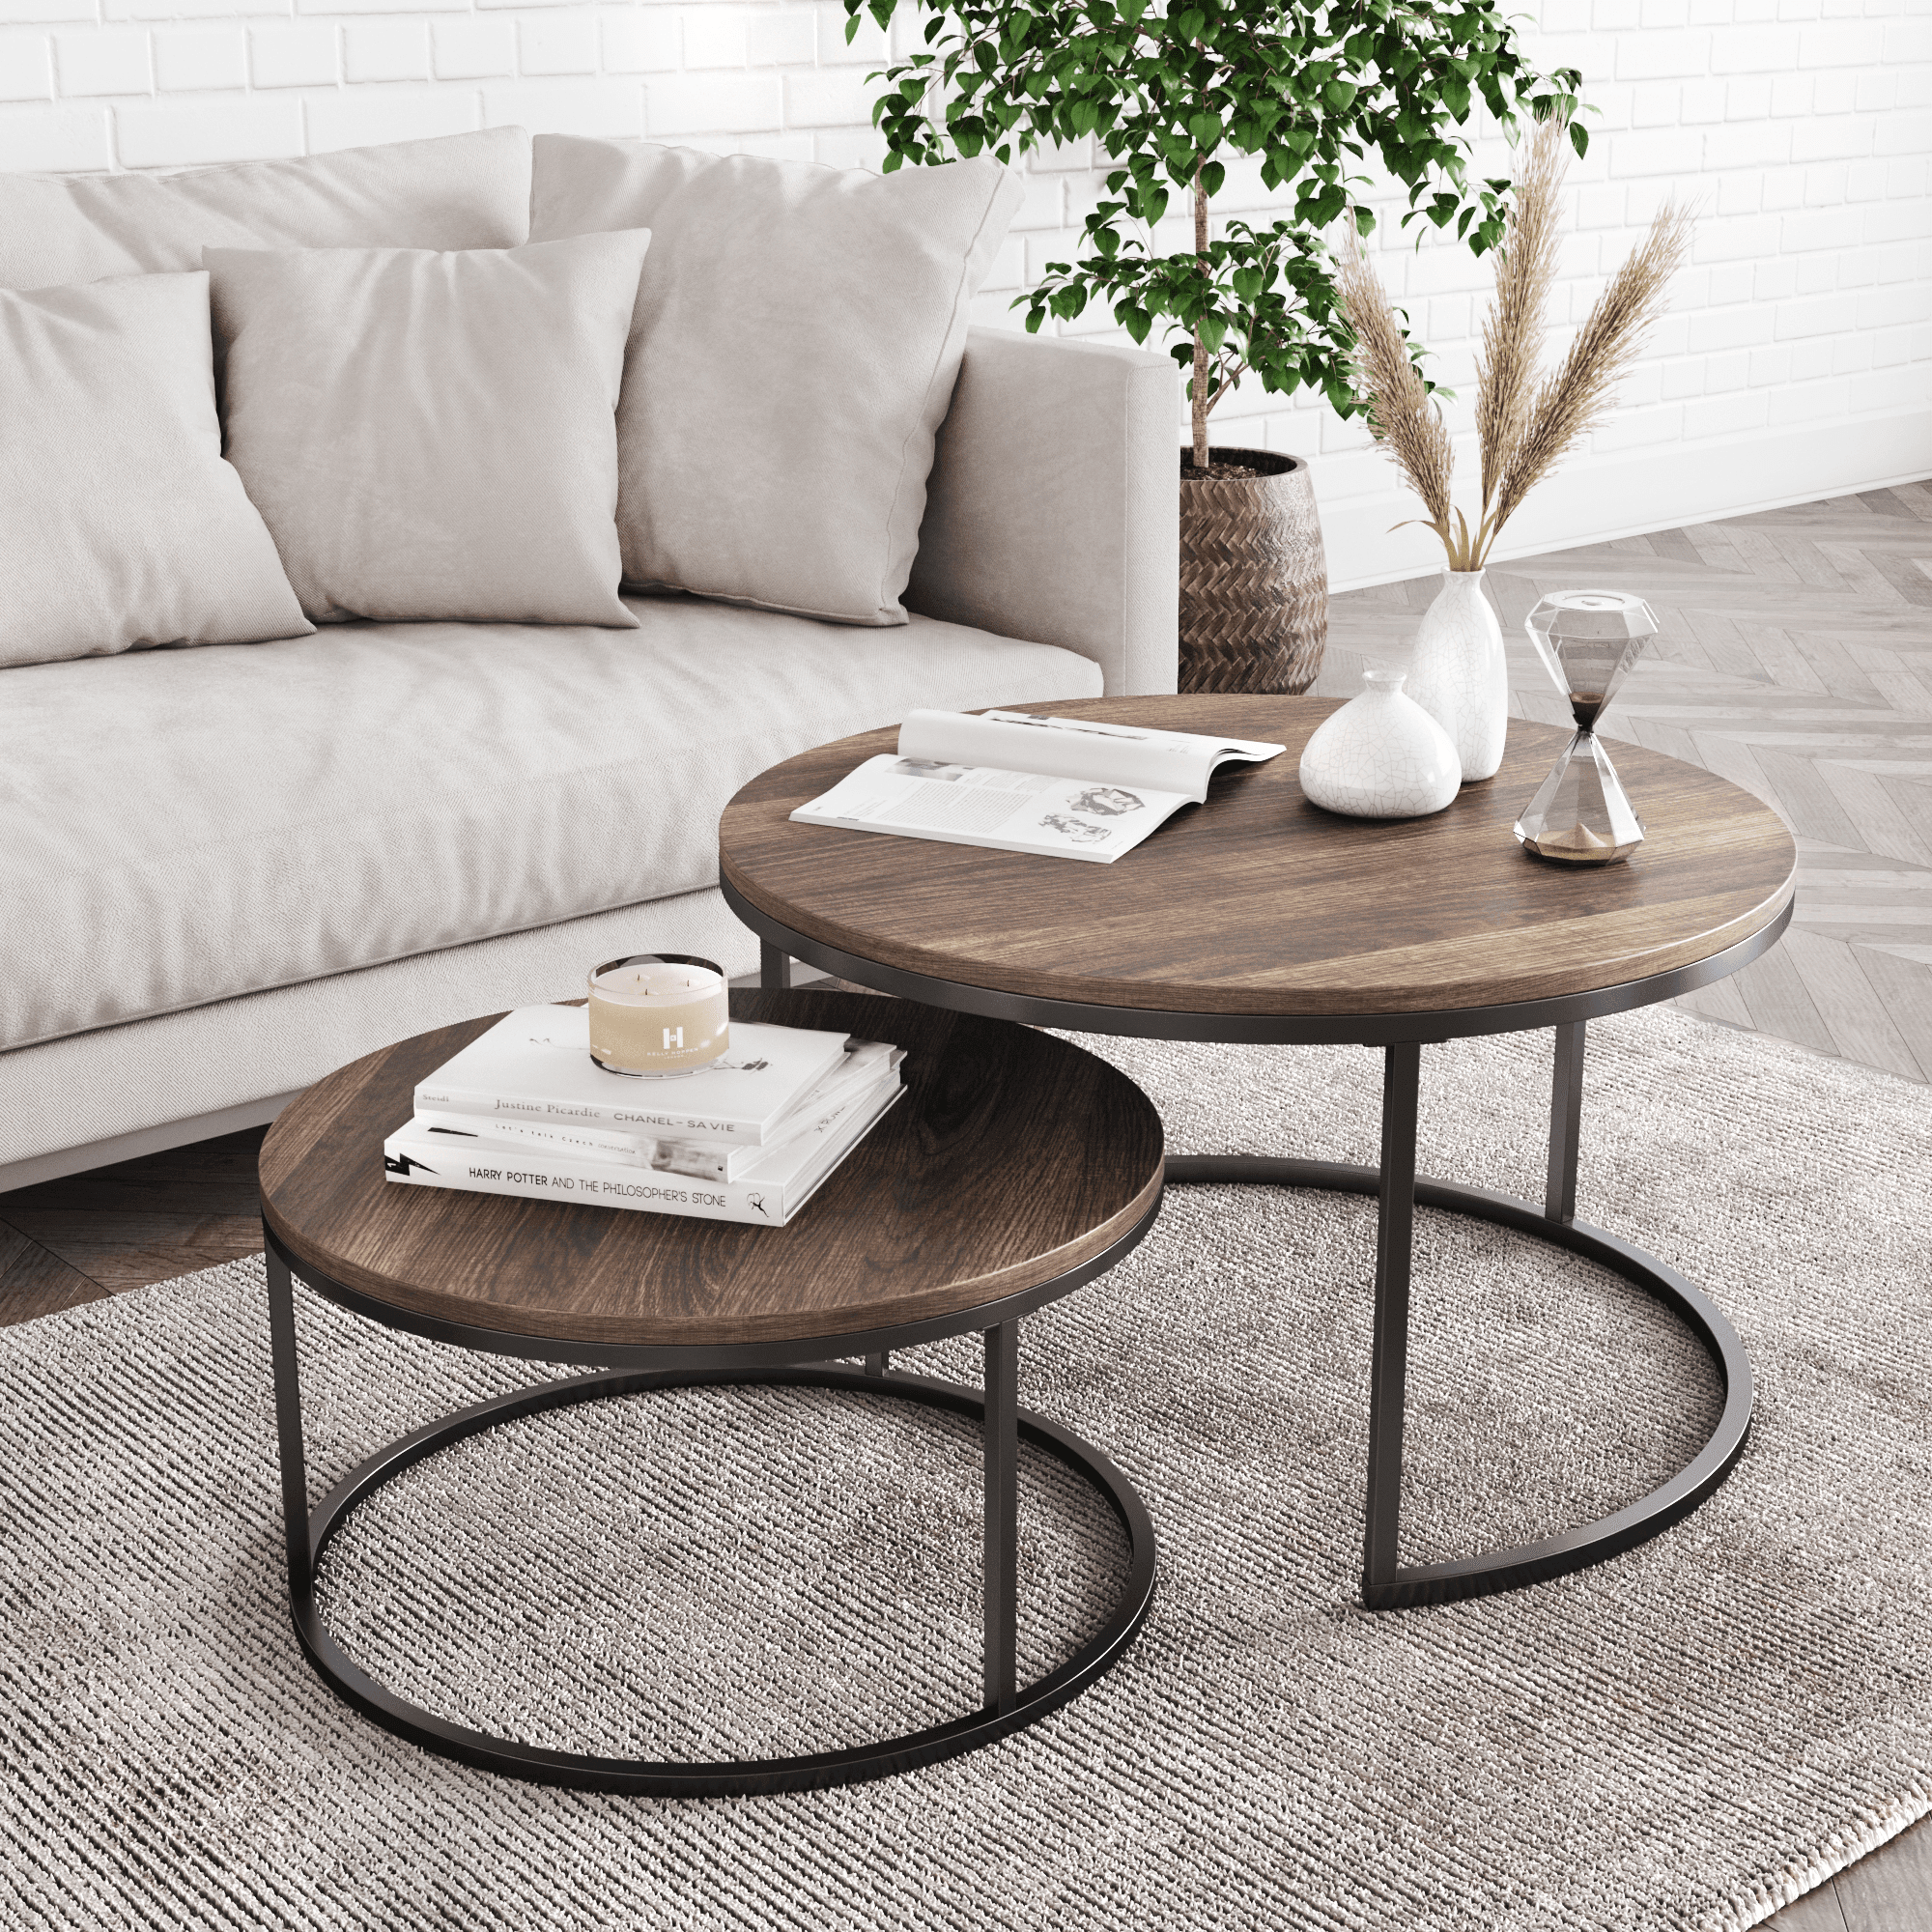 Stella Round Nesting Or Stacking Coffee Table Set Of 2 Wood Finish Intended For Round Coffee Tables With Steel Frames (View 6 of 21)